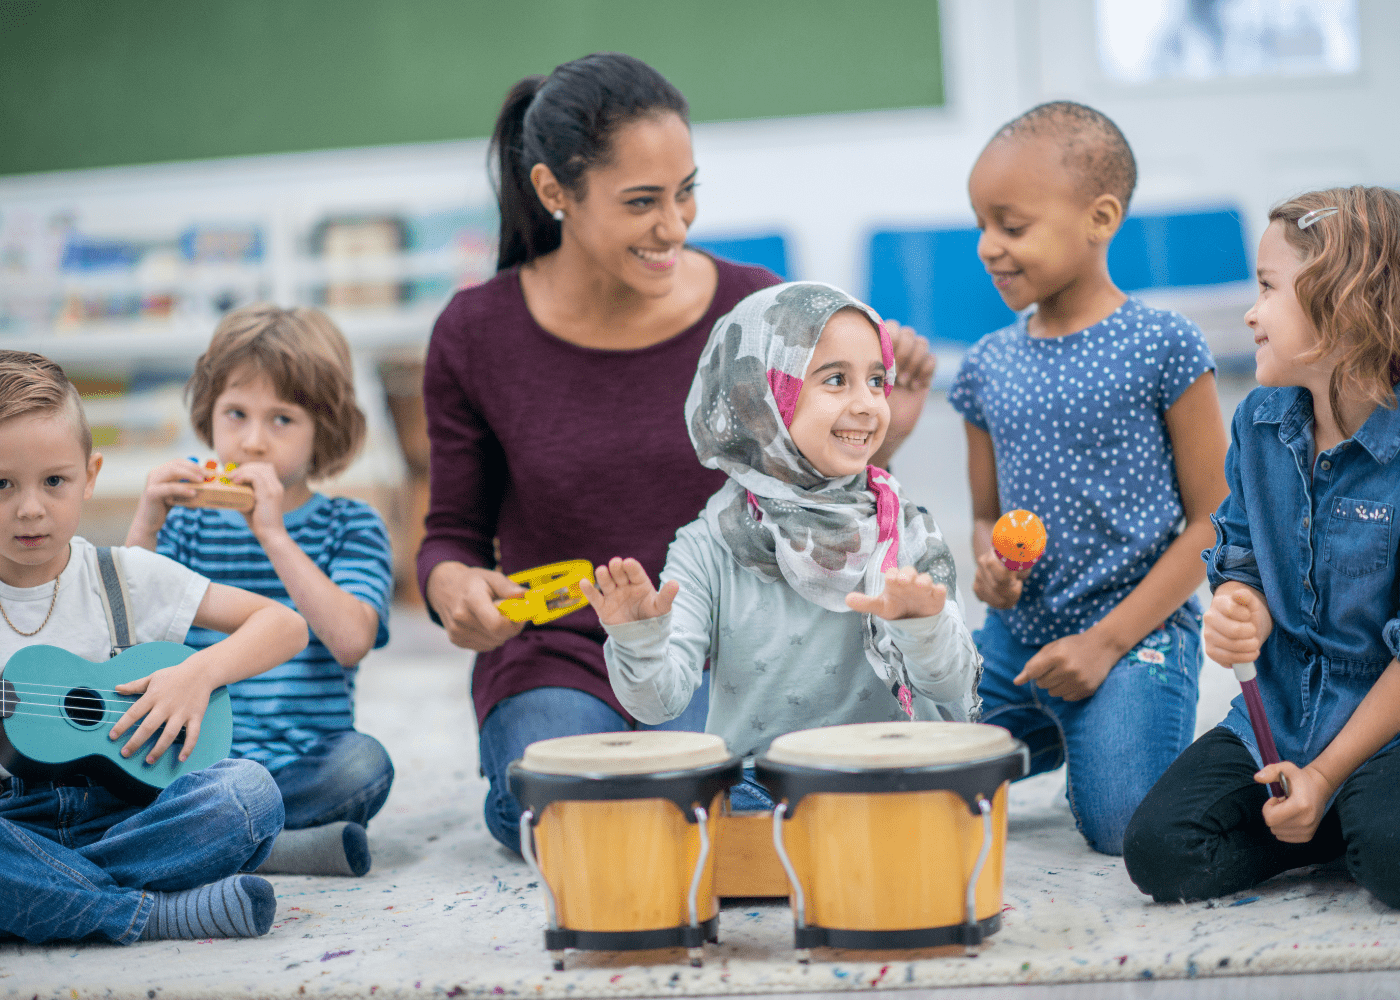 A photo of five children enjoying playing with musical instruments for kids, including a drum, ukulele, and maracas.